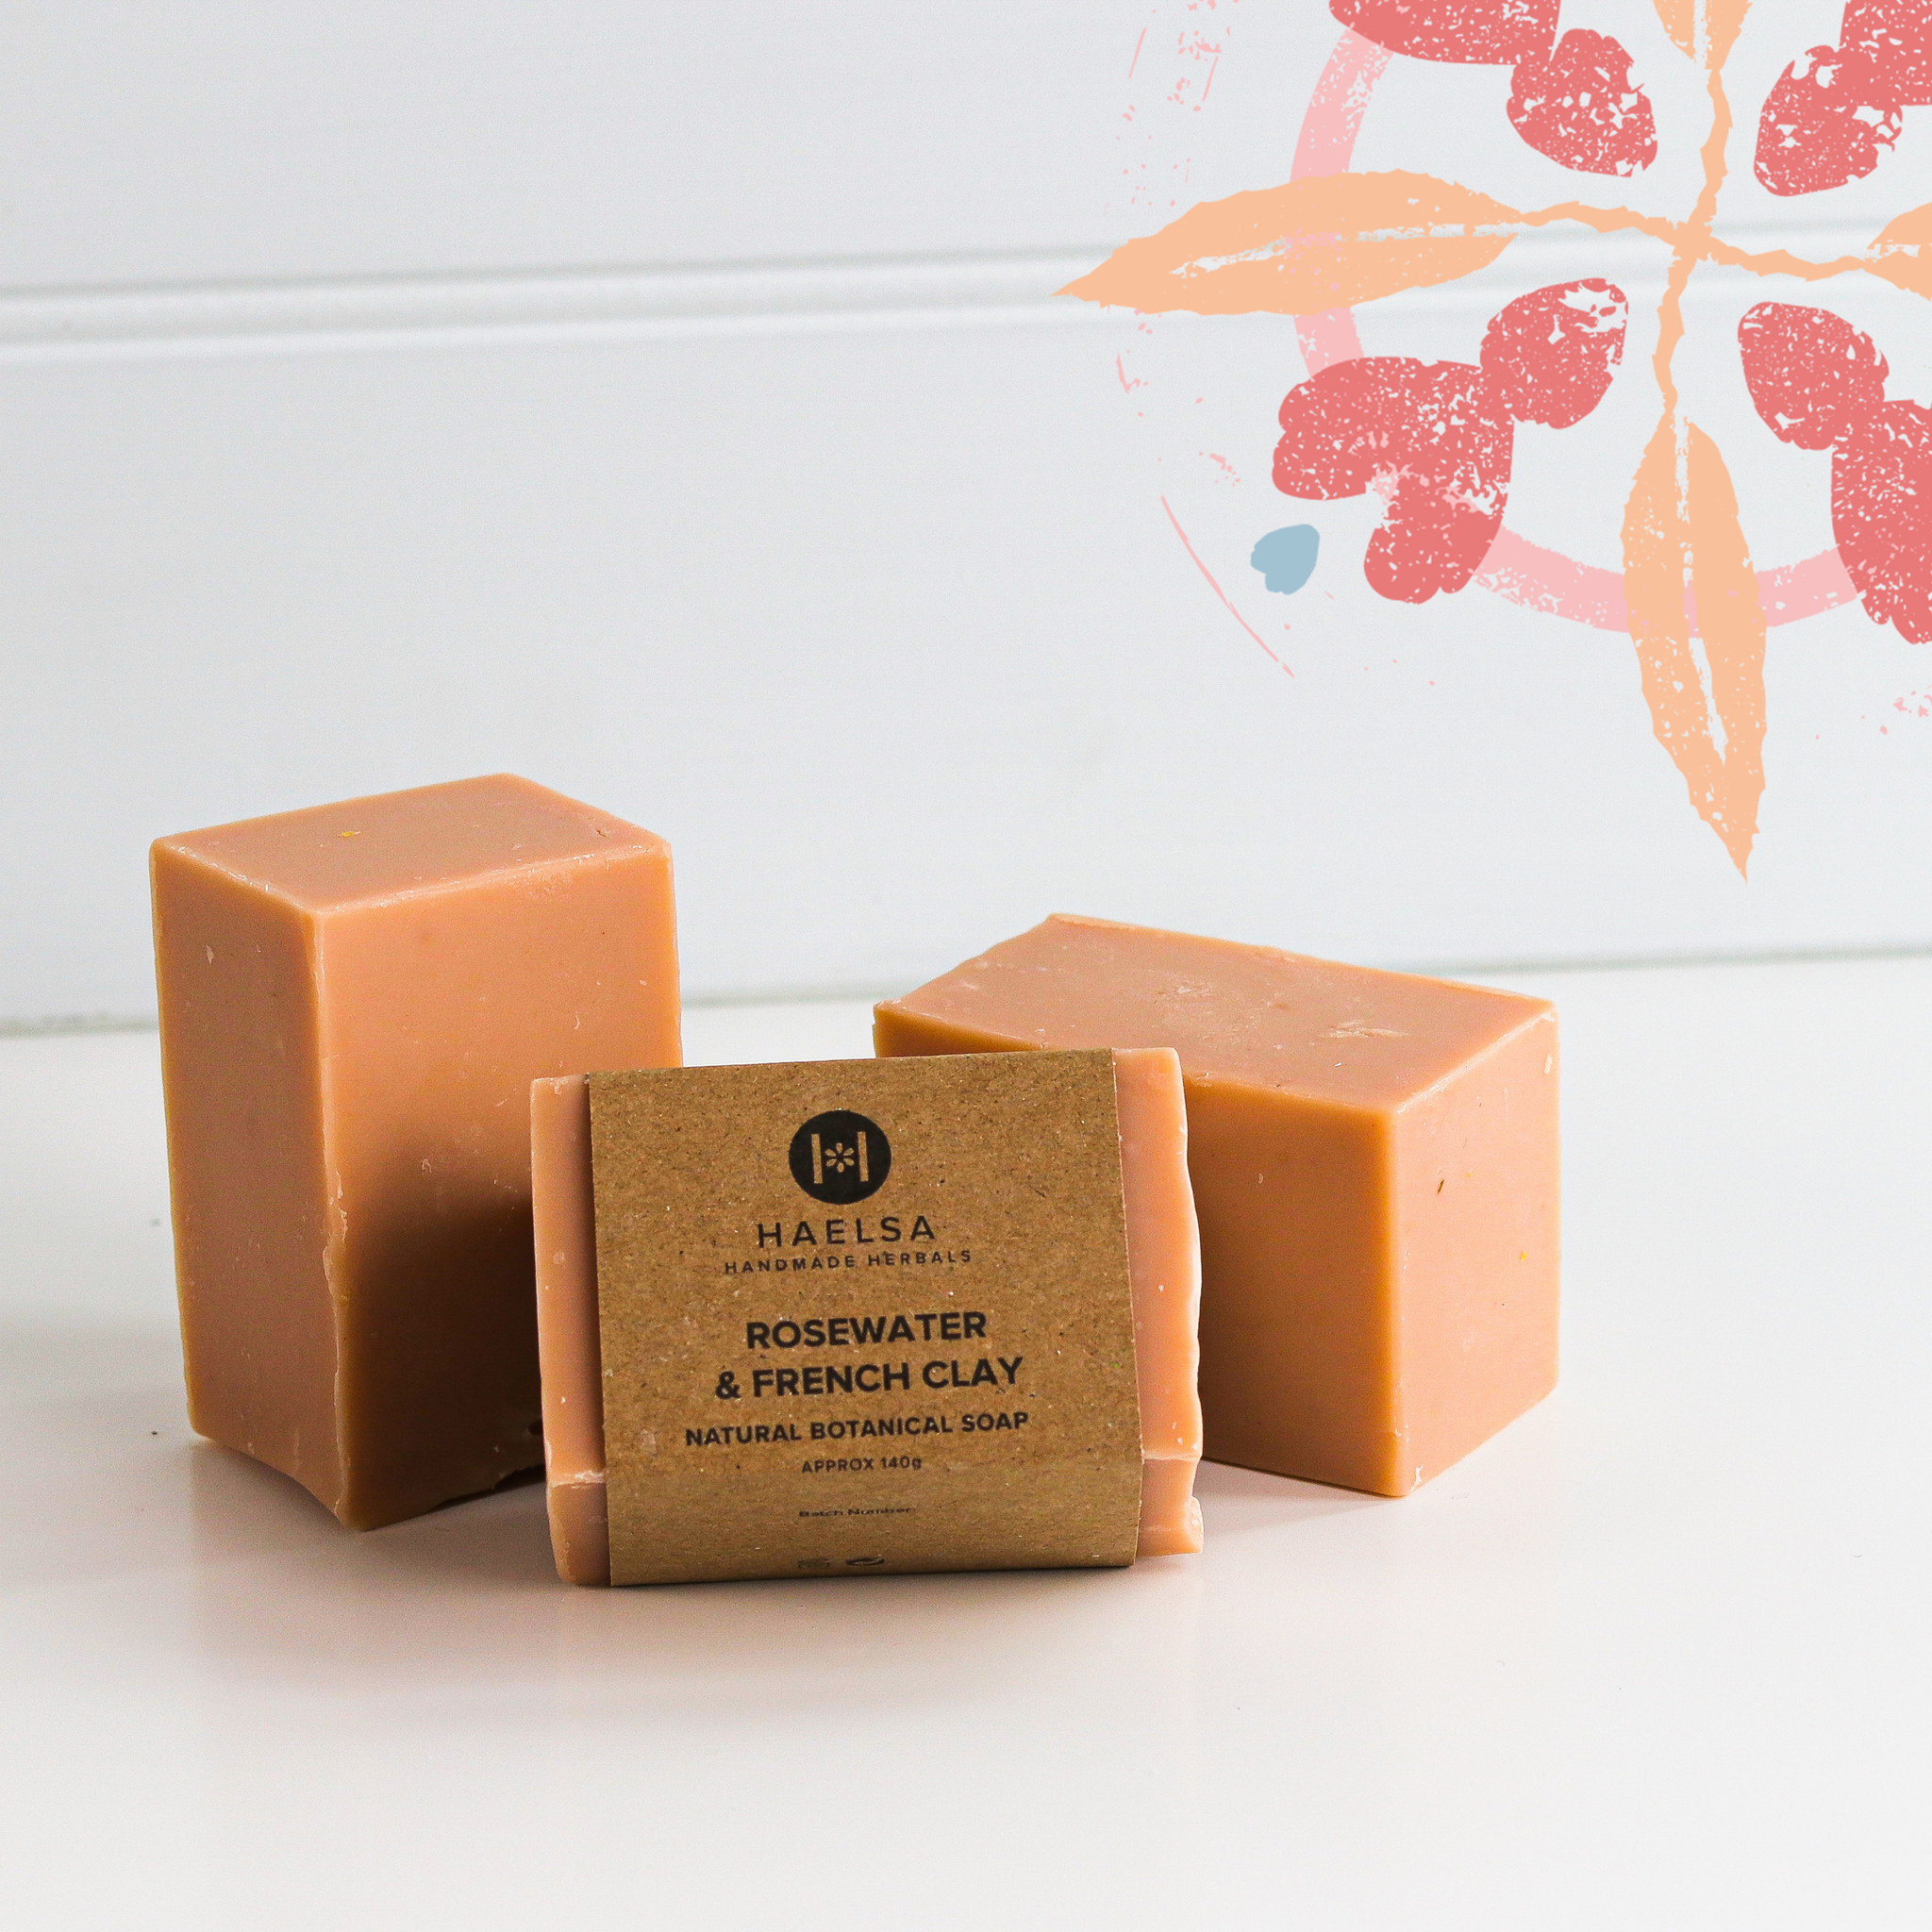 Rosewater & French clay soap in group